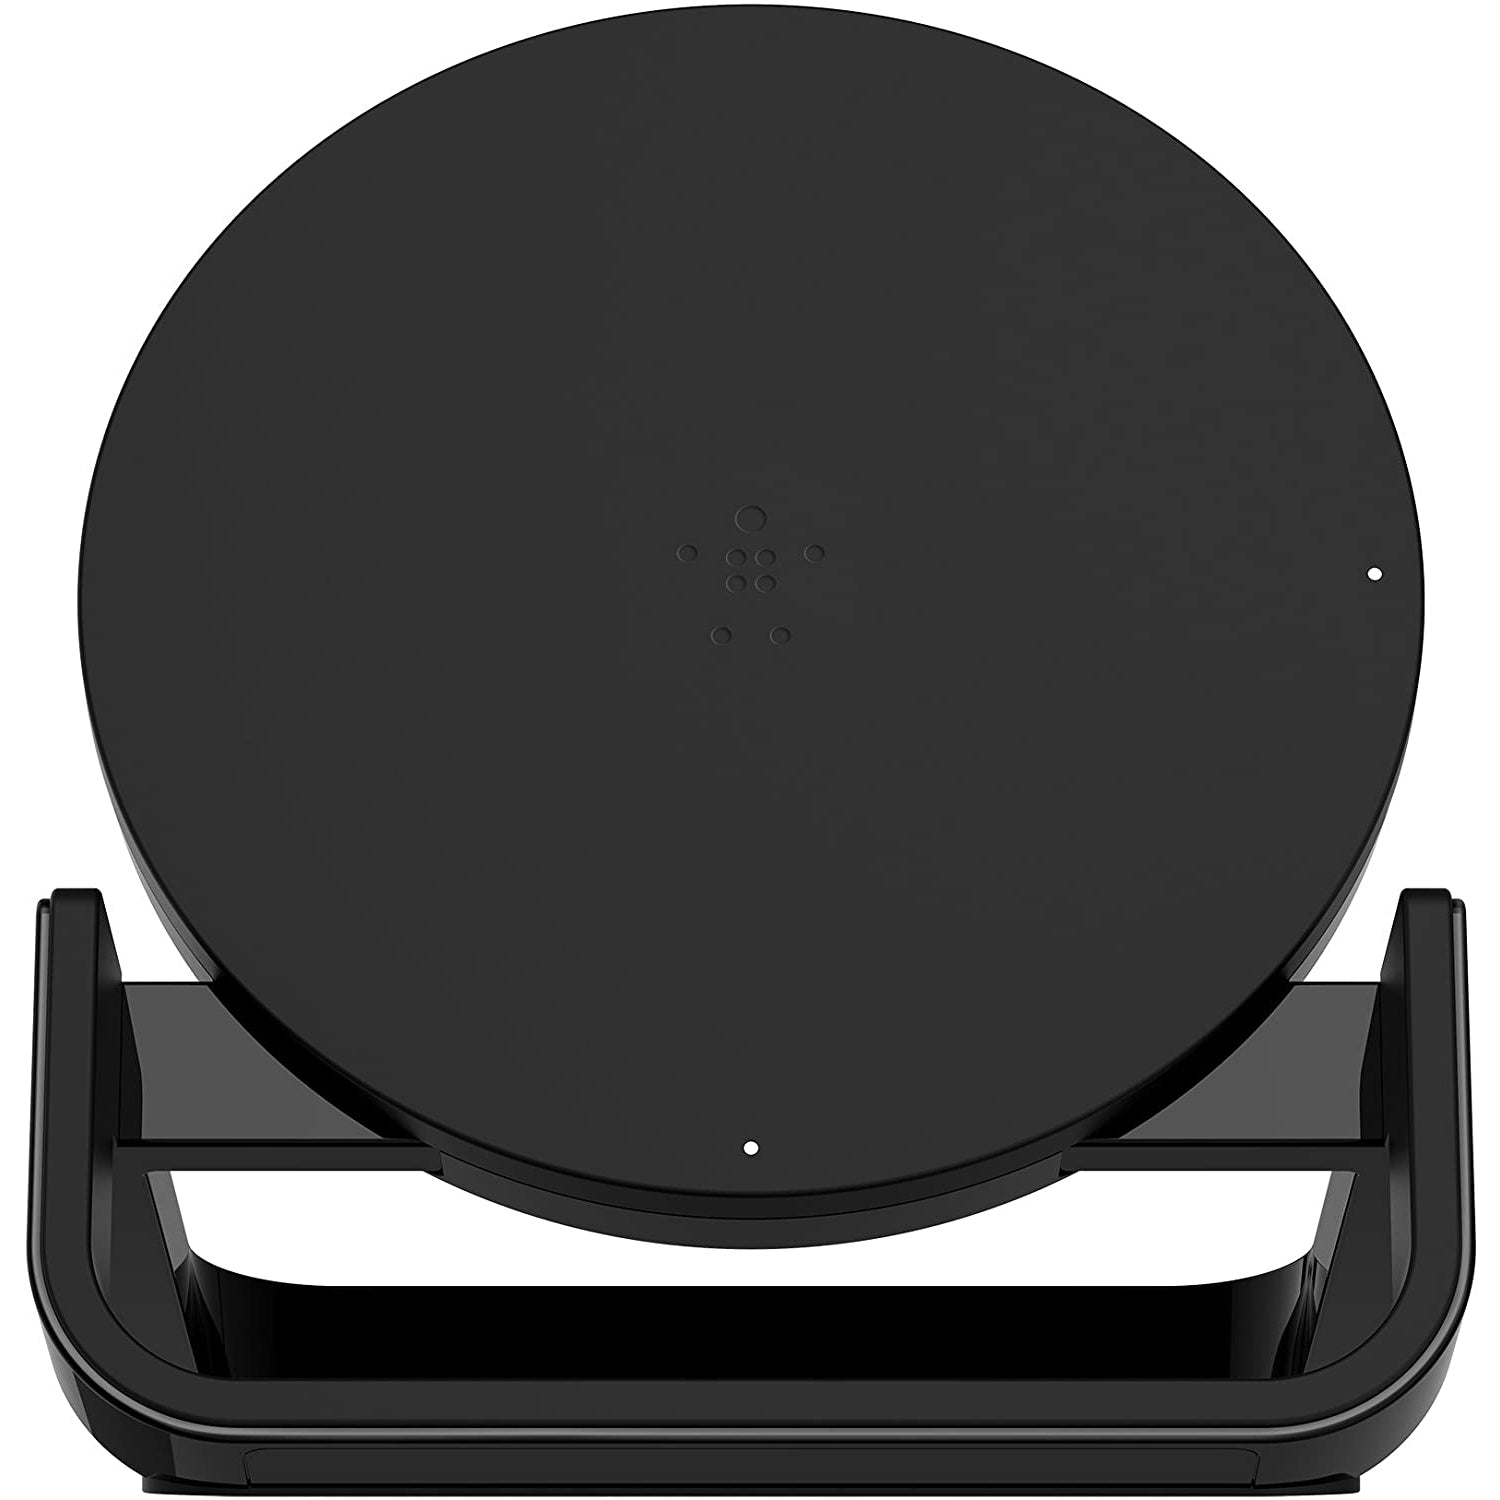 Belkin Boost Up Wireless Charging Stand 10W - Black - Refurbished: Good Condition